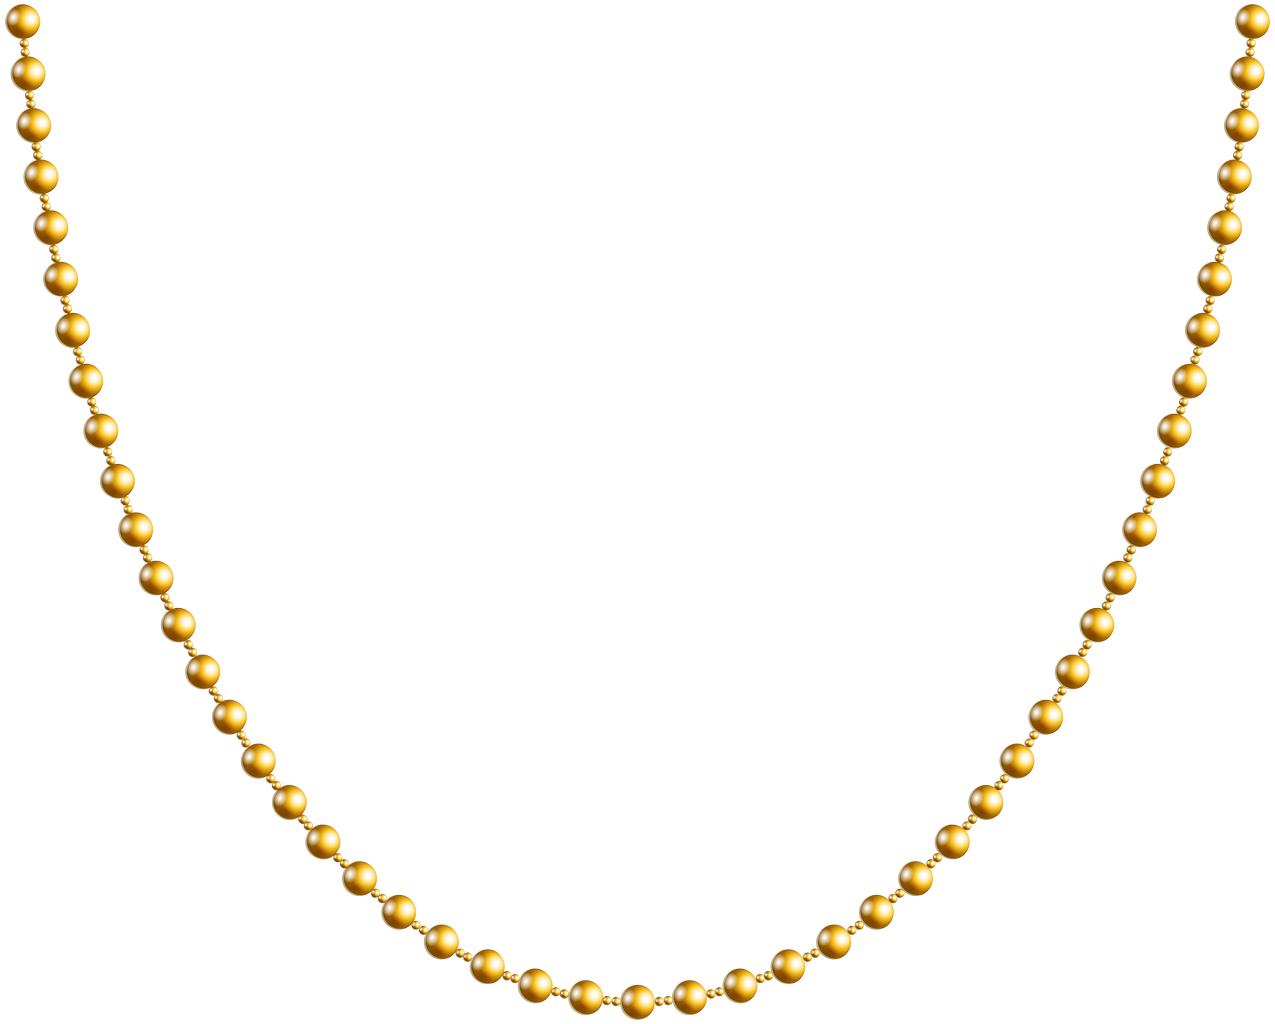 Necklace PNG Pic Clip Art Background